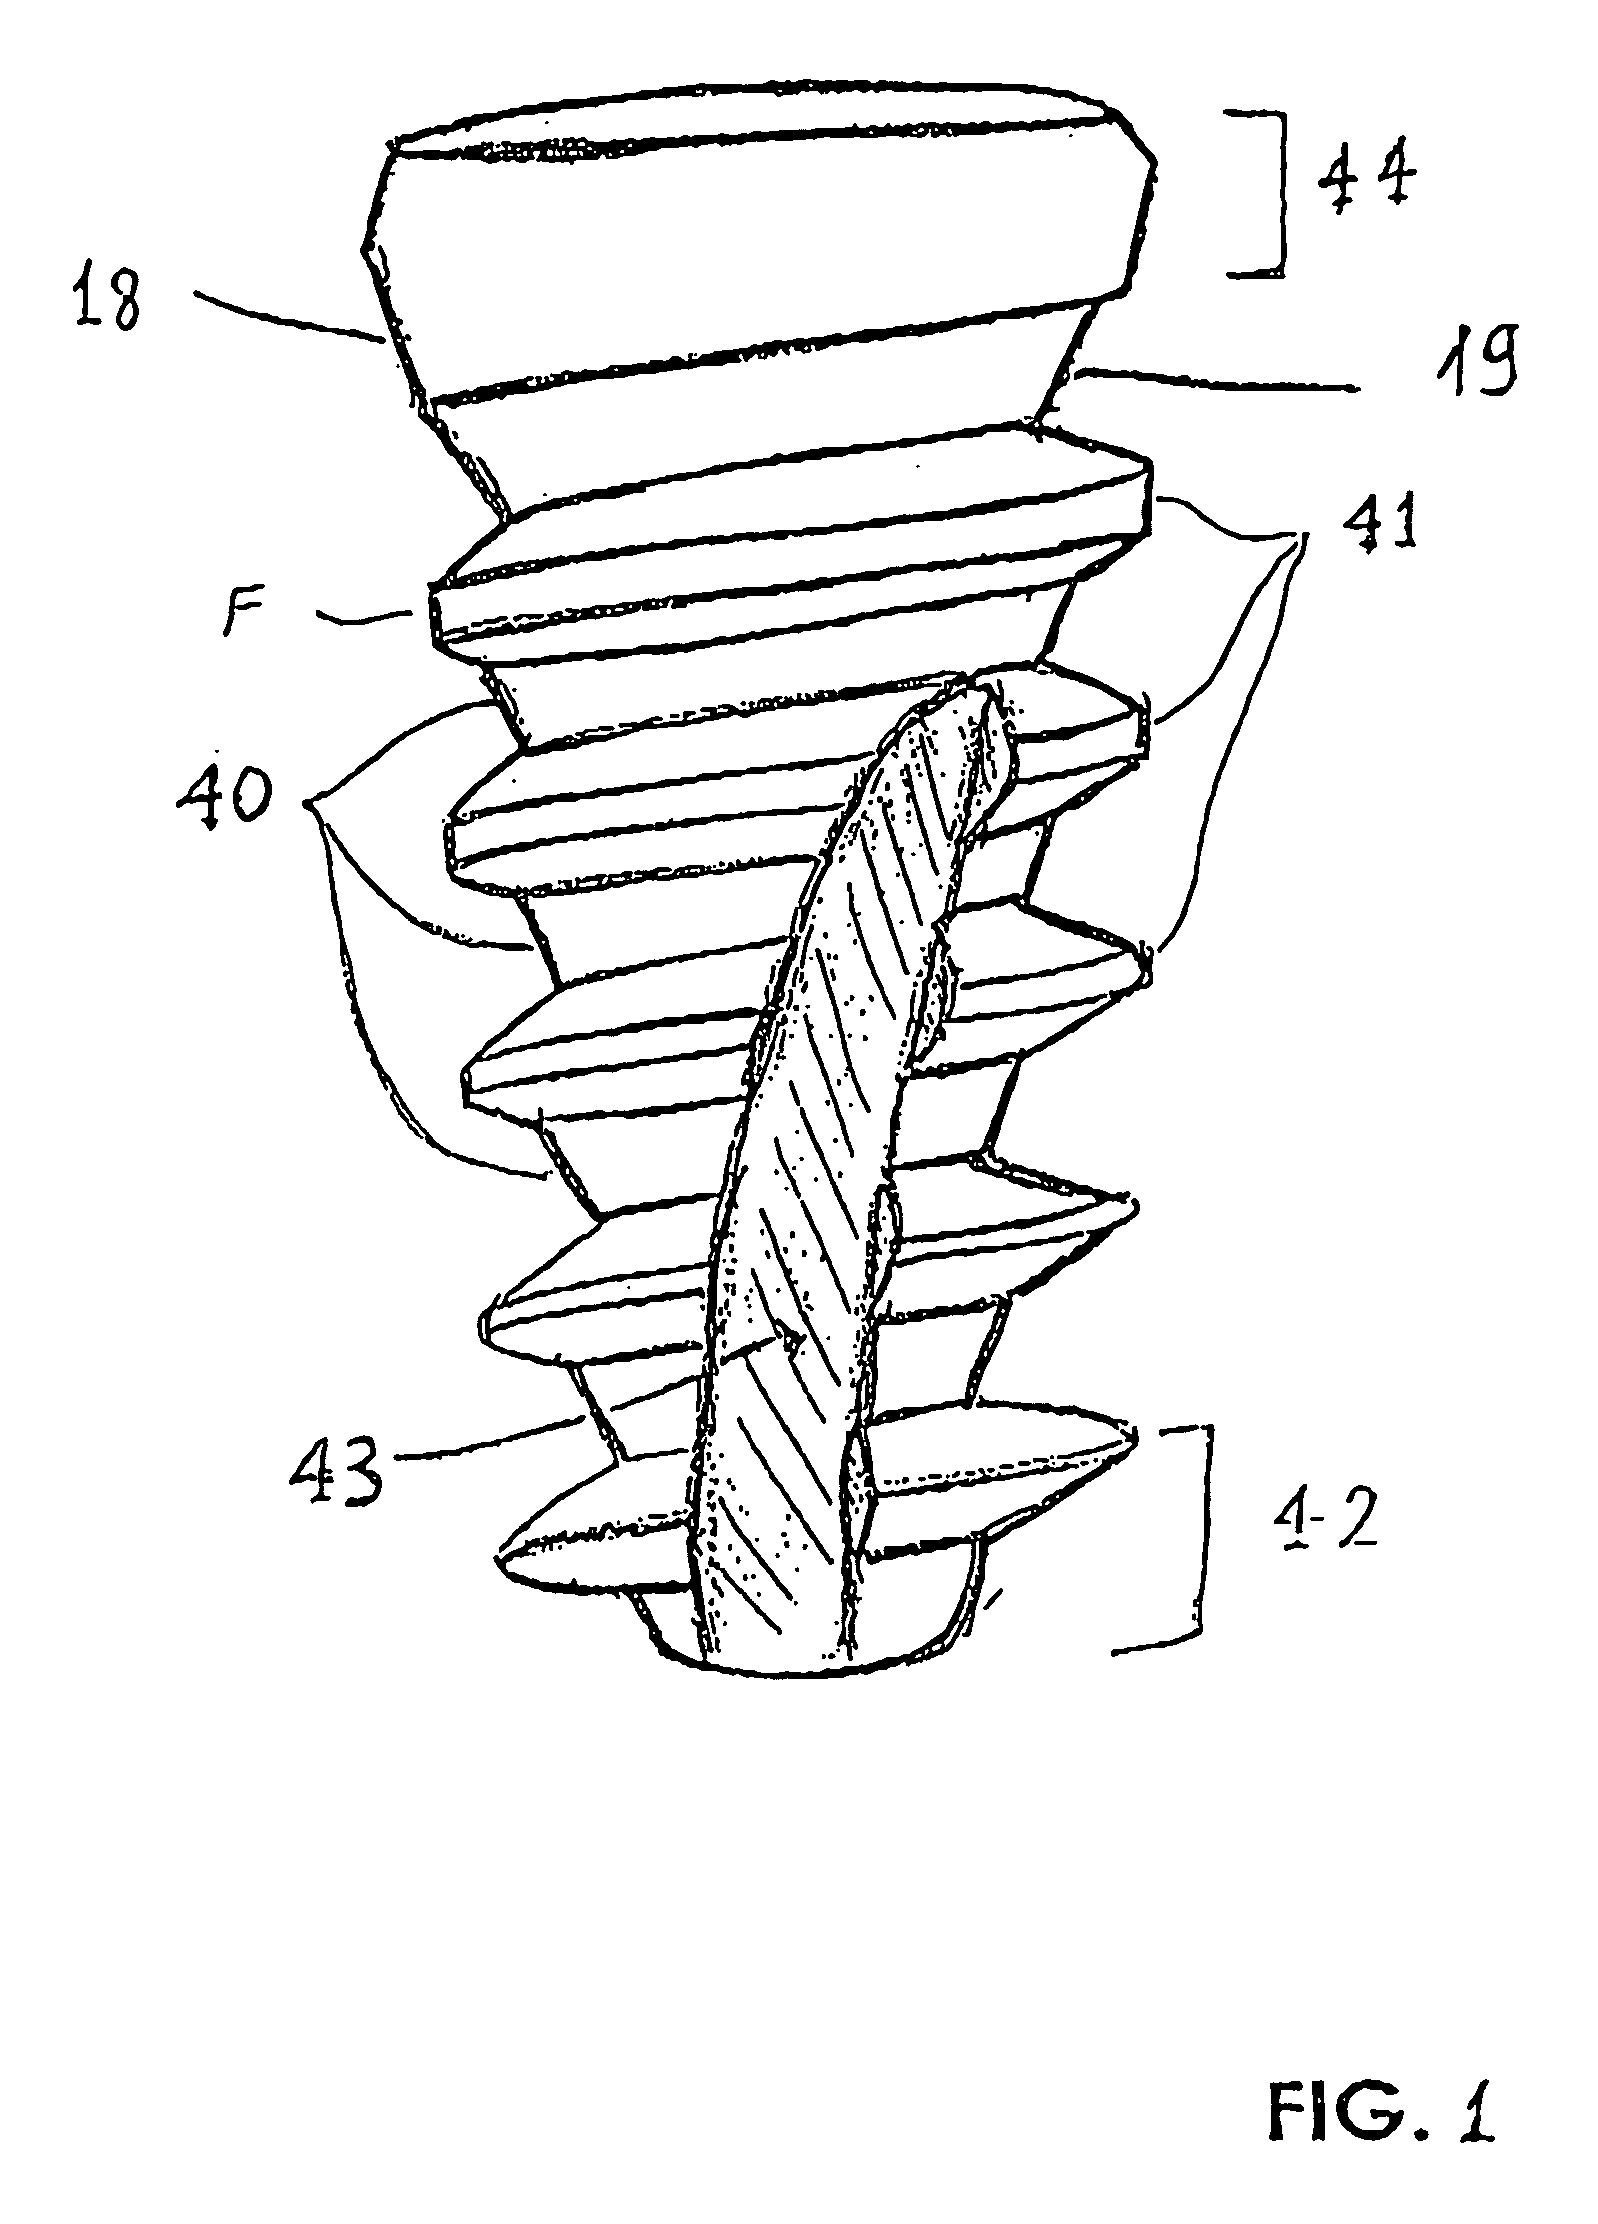 Condensing skeletal implant that facilitate insertions